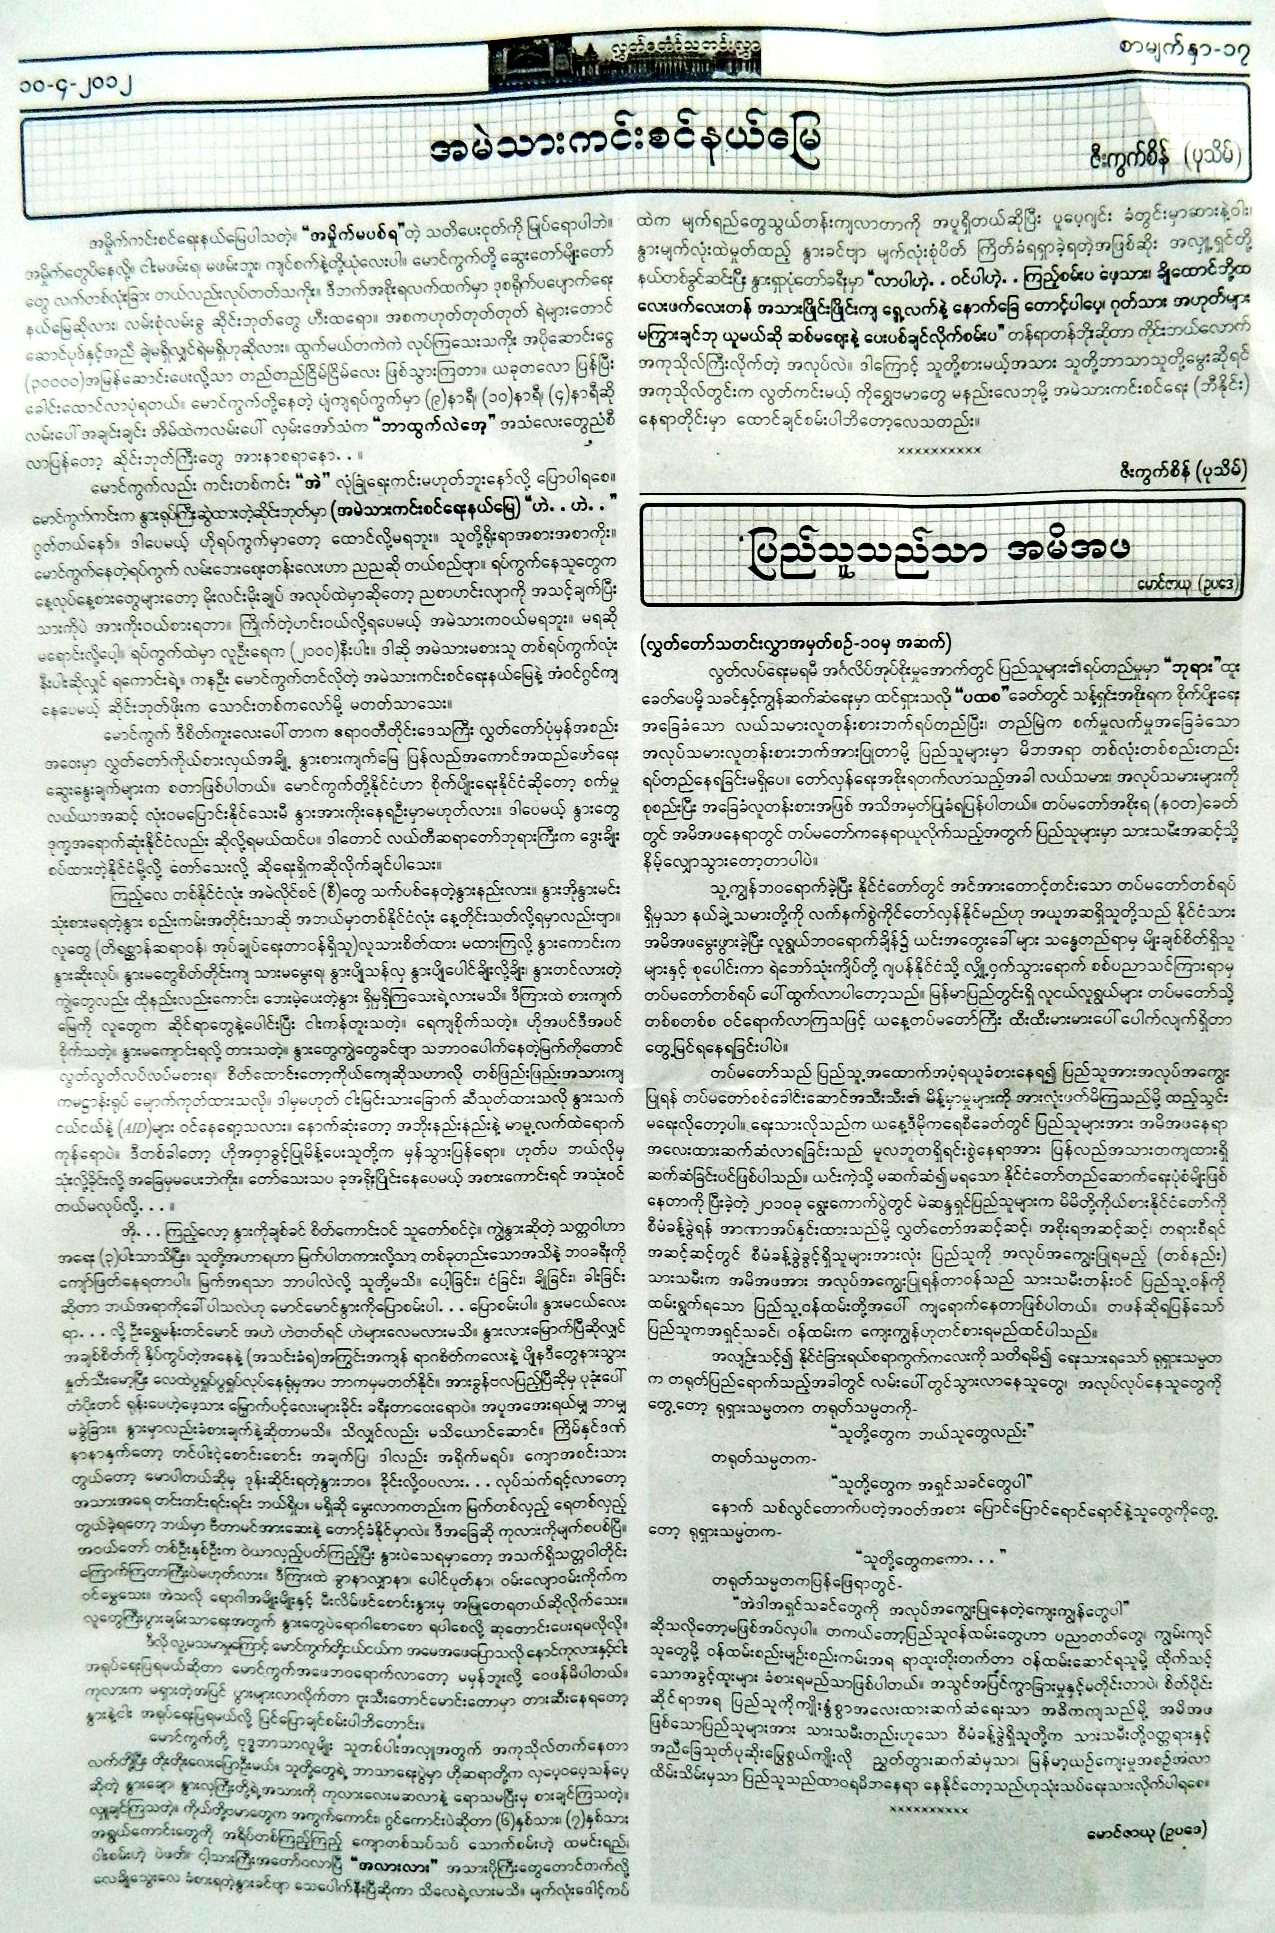 Regional Islamic Religious Affairs Council sent official letter to Ayeyarwady Regional Hluttaw for its newsletter’s insulting Islam